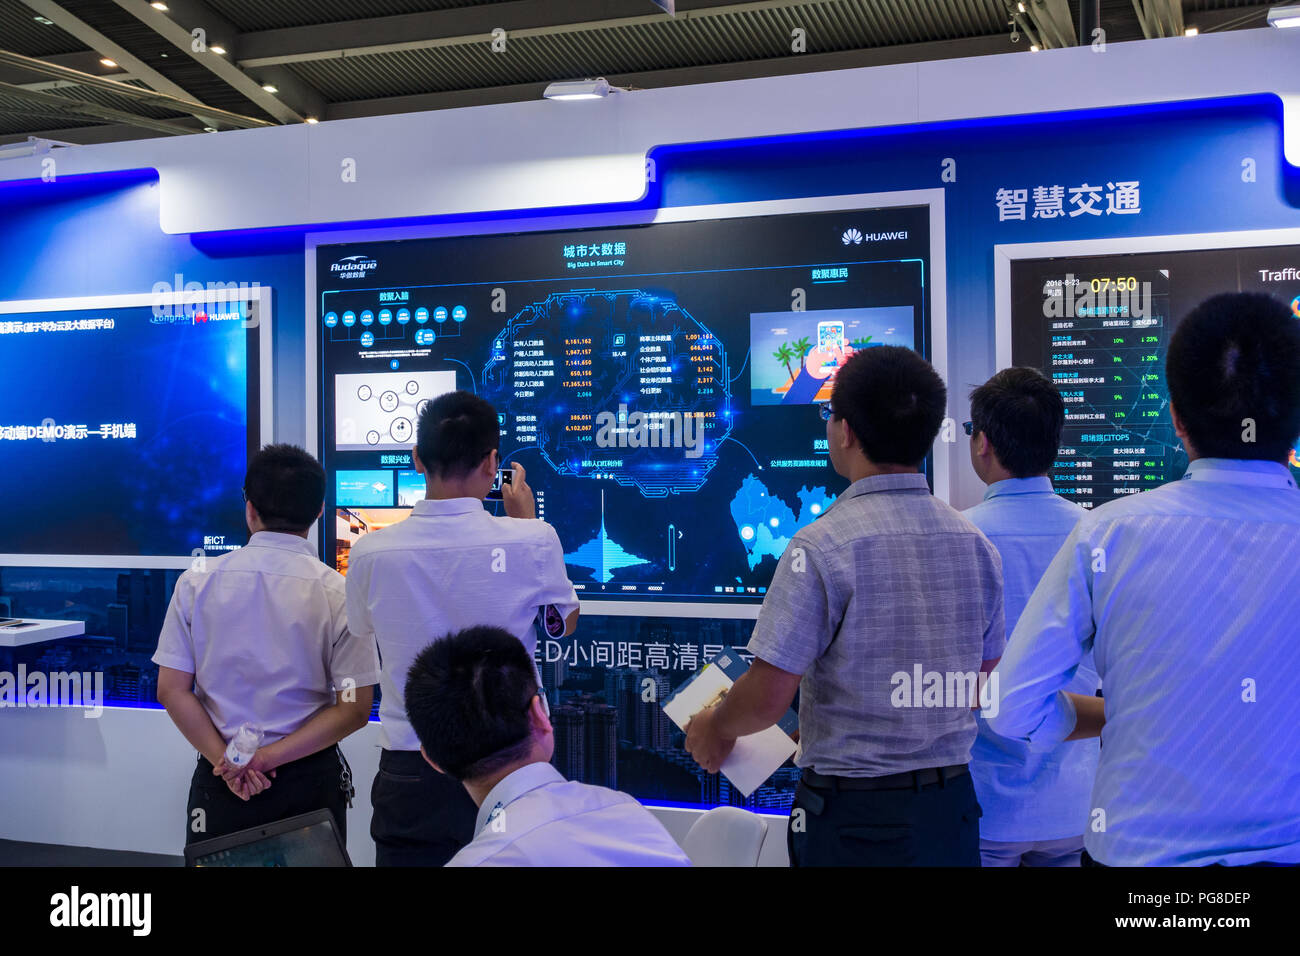 Smart city exhibits, urban big data, digital control systems, hi-tech monitoring technology, people at Fourth China Smart City Expo 2018 in Shenzhen, China. Stock Photo